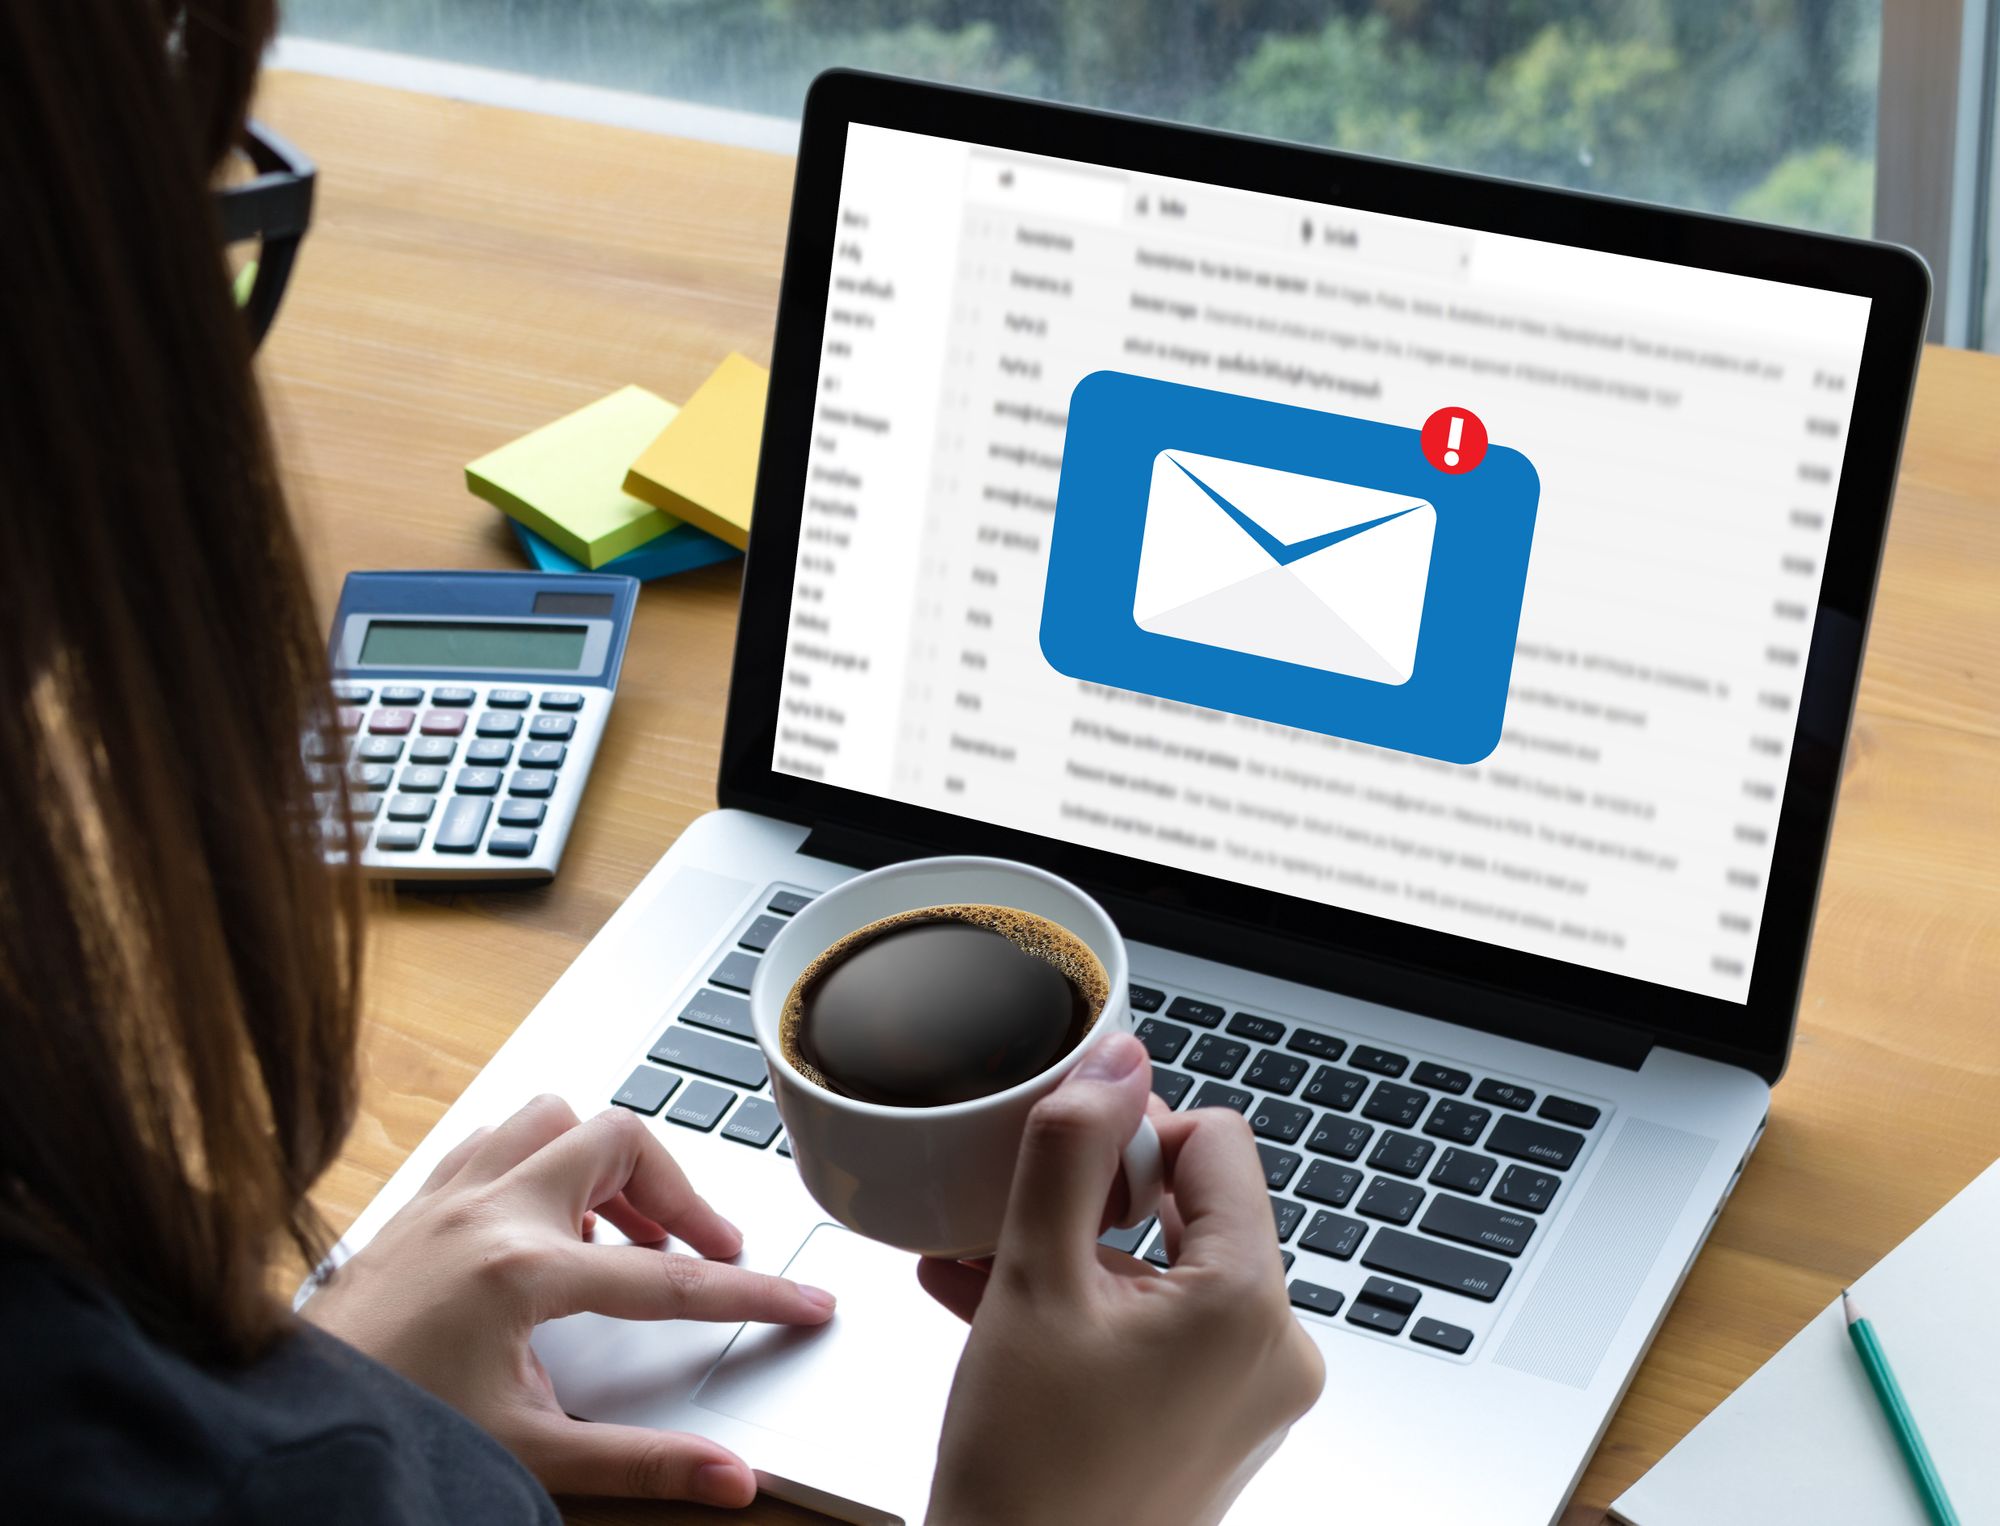 Sample Follow Up Emails To Send Your Prospective Client